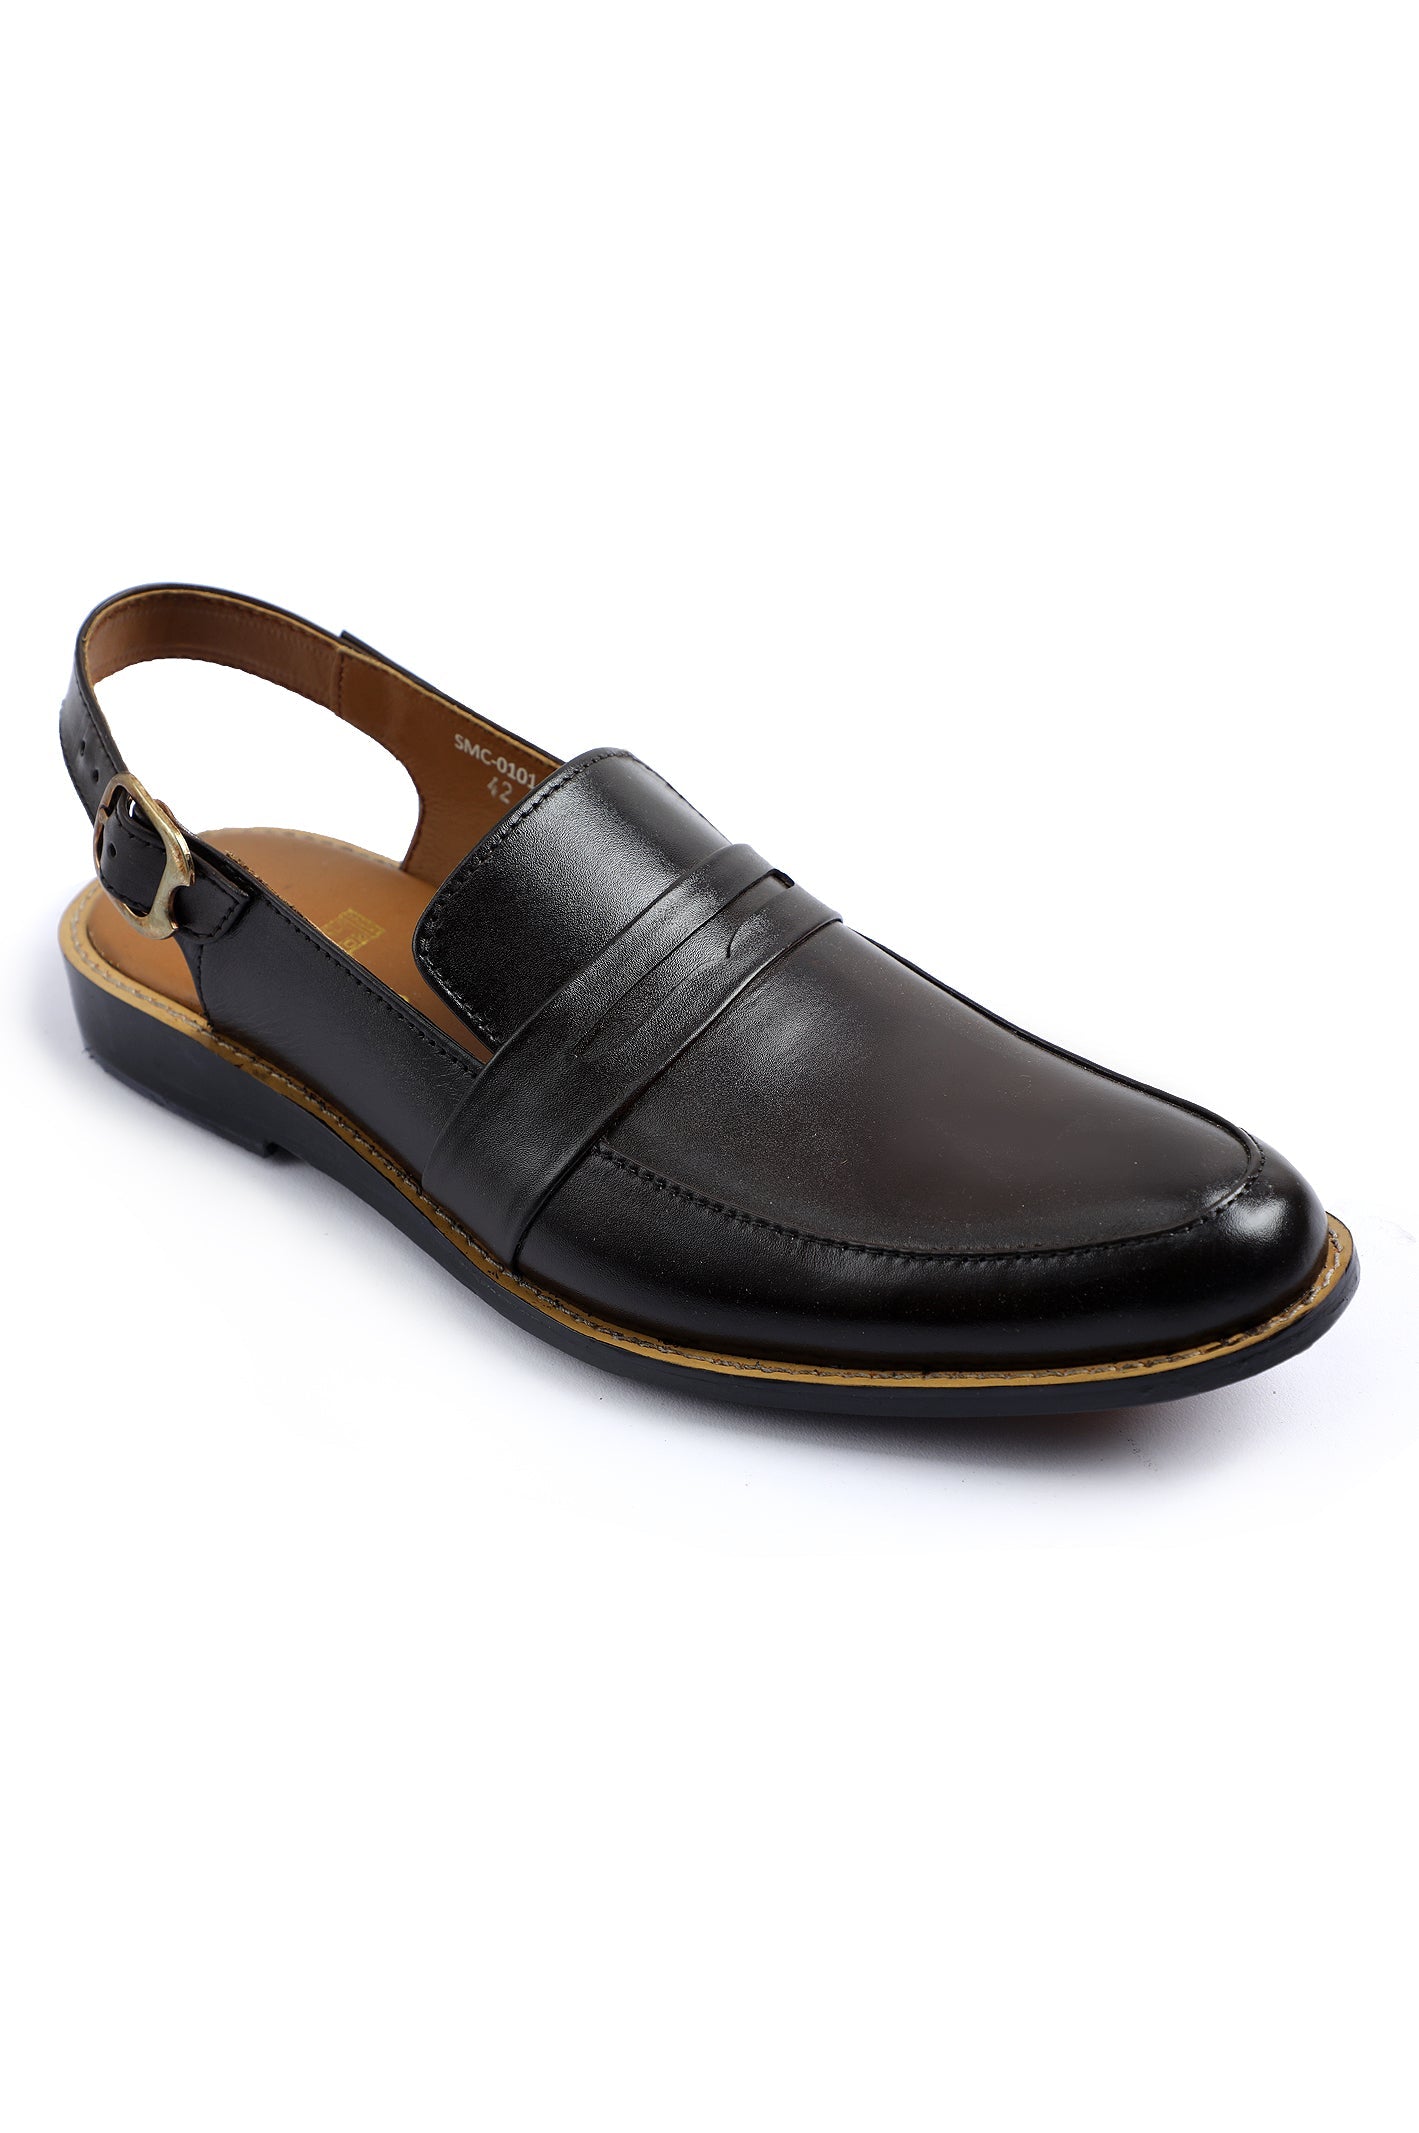 Casual Shoes For Men SKU: SMC-0101-COFFEE - Diners